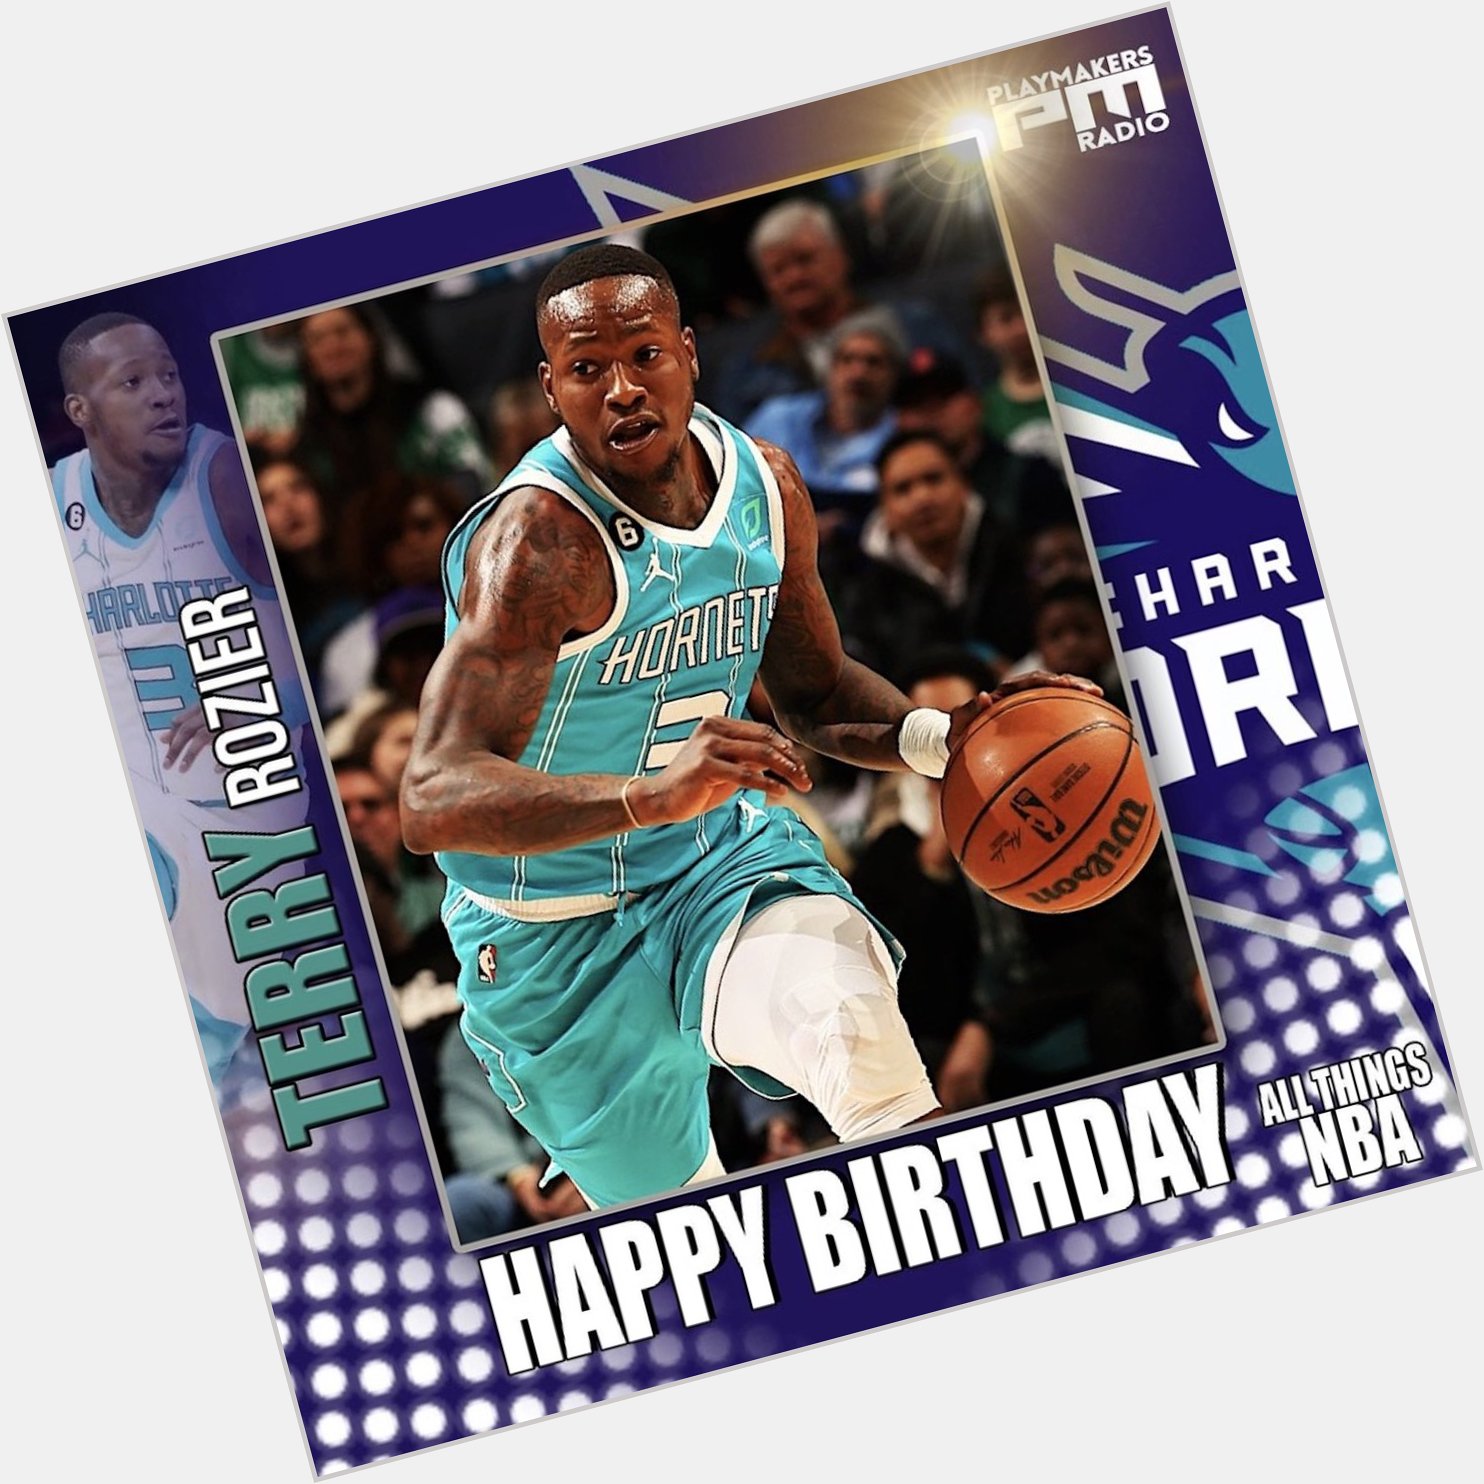 Join us in wishing Terry Rozier of the Charlotte Hornets a very happy 29th birthday!!!   